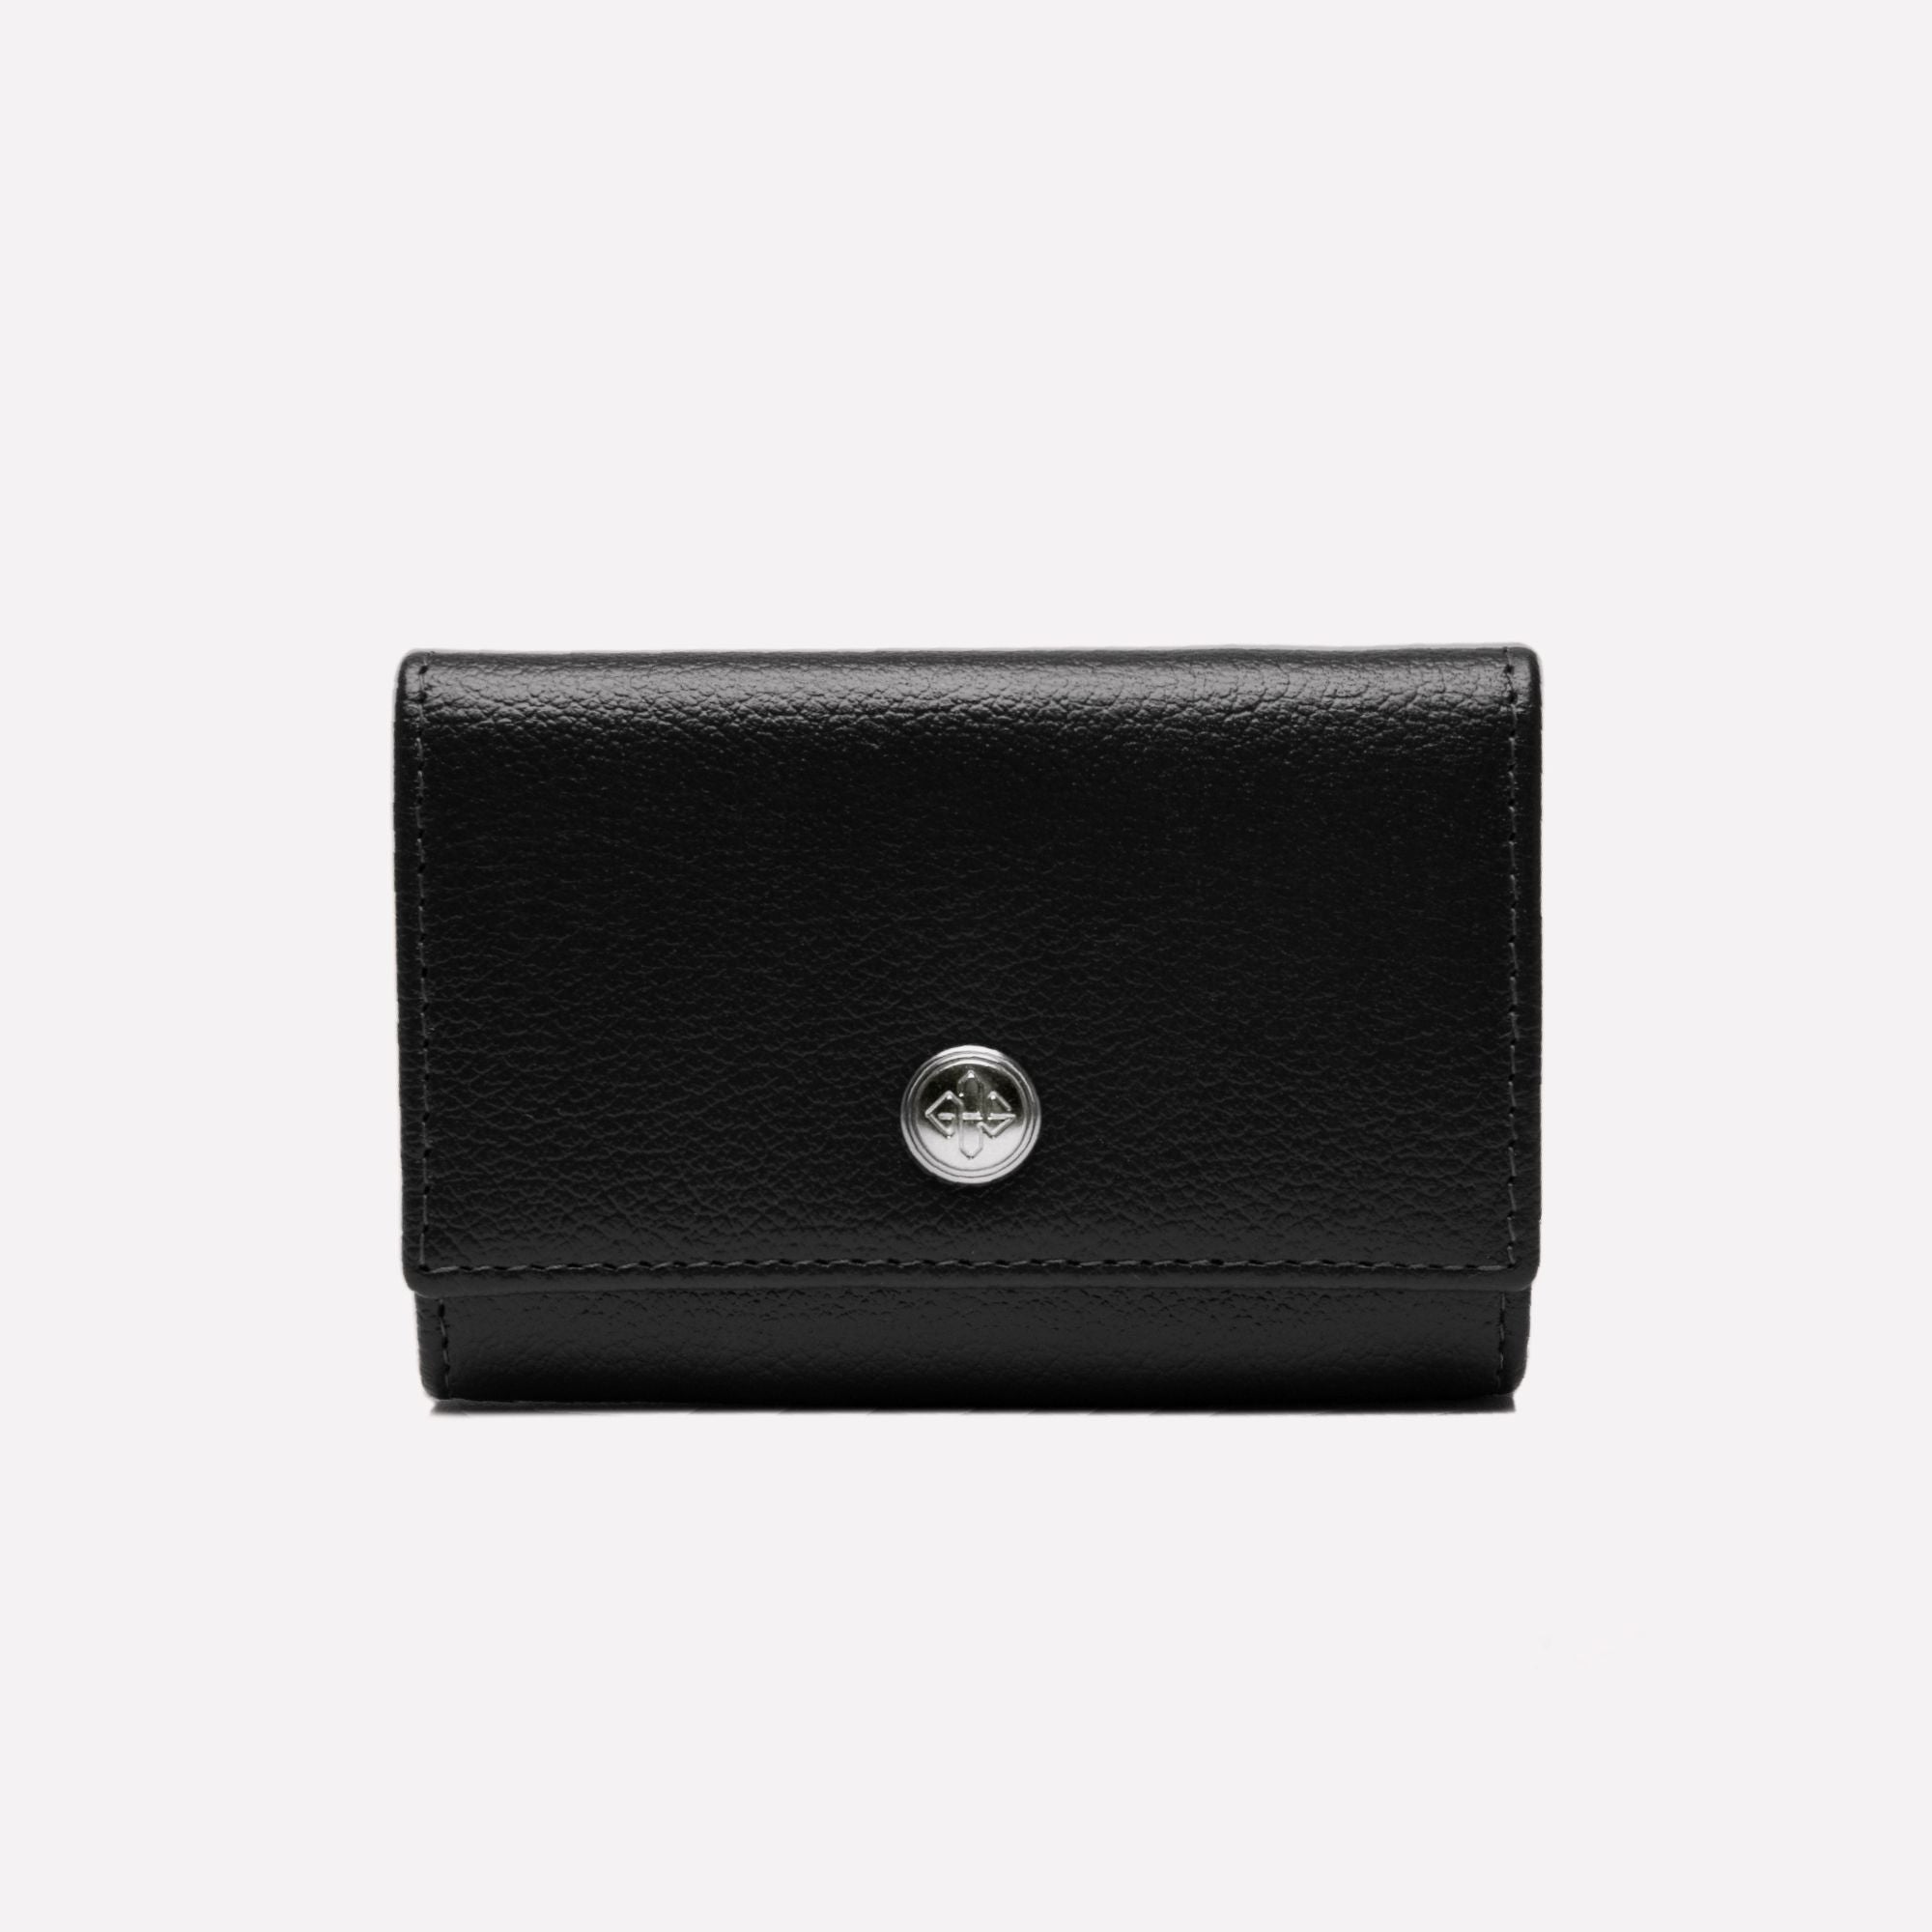 Buy Coin Purse With Snap Closure, Pu Leather Kiss Lock Coin Purse from  Xiamen BG Industrial Co., Ltd., China | Tradewheel.com